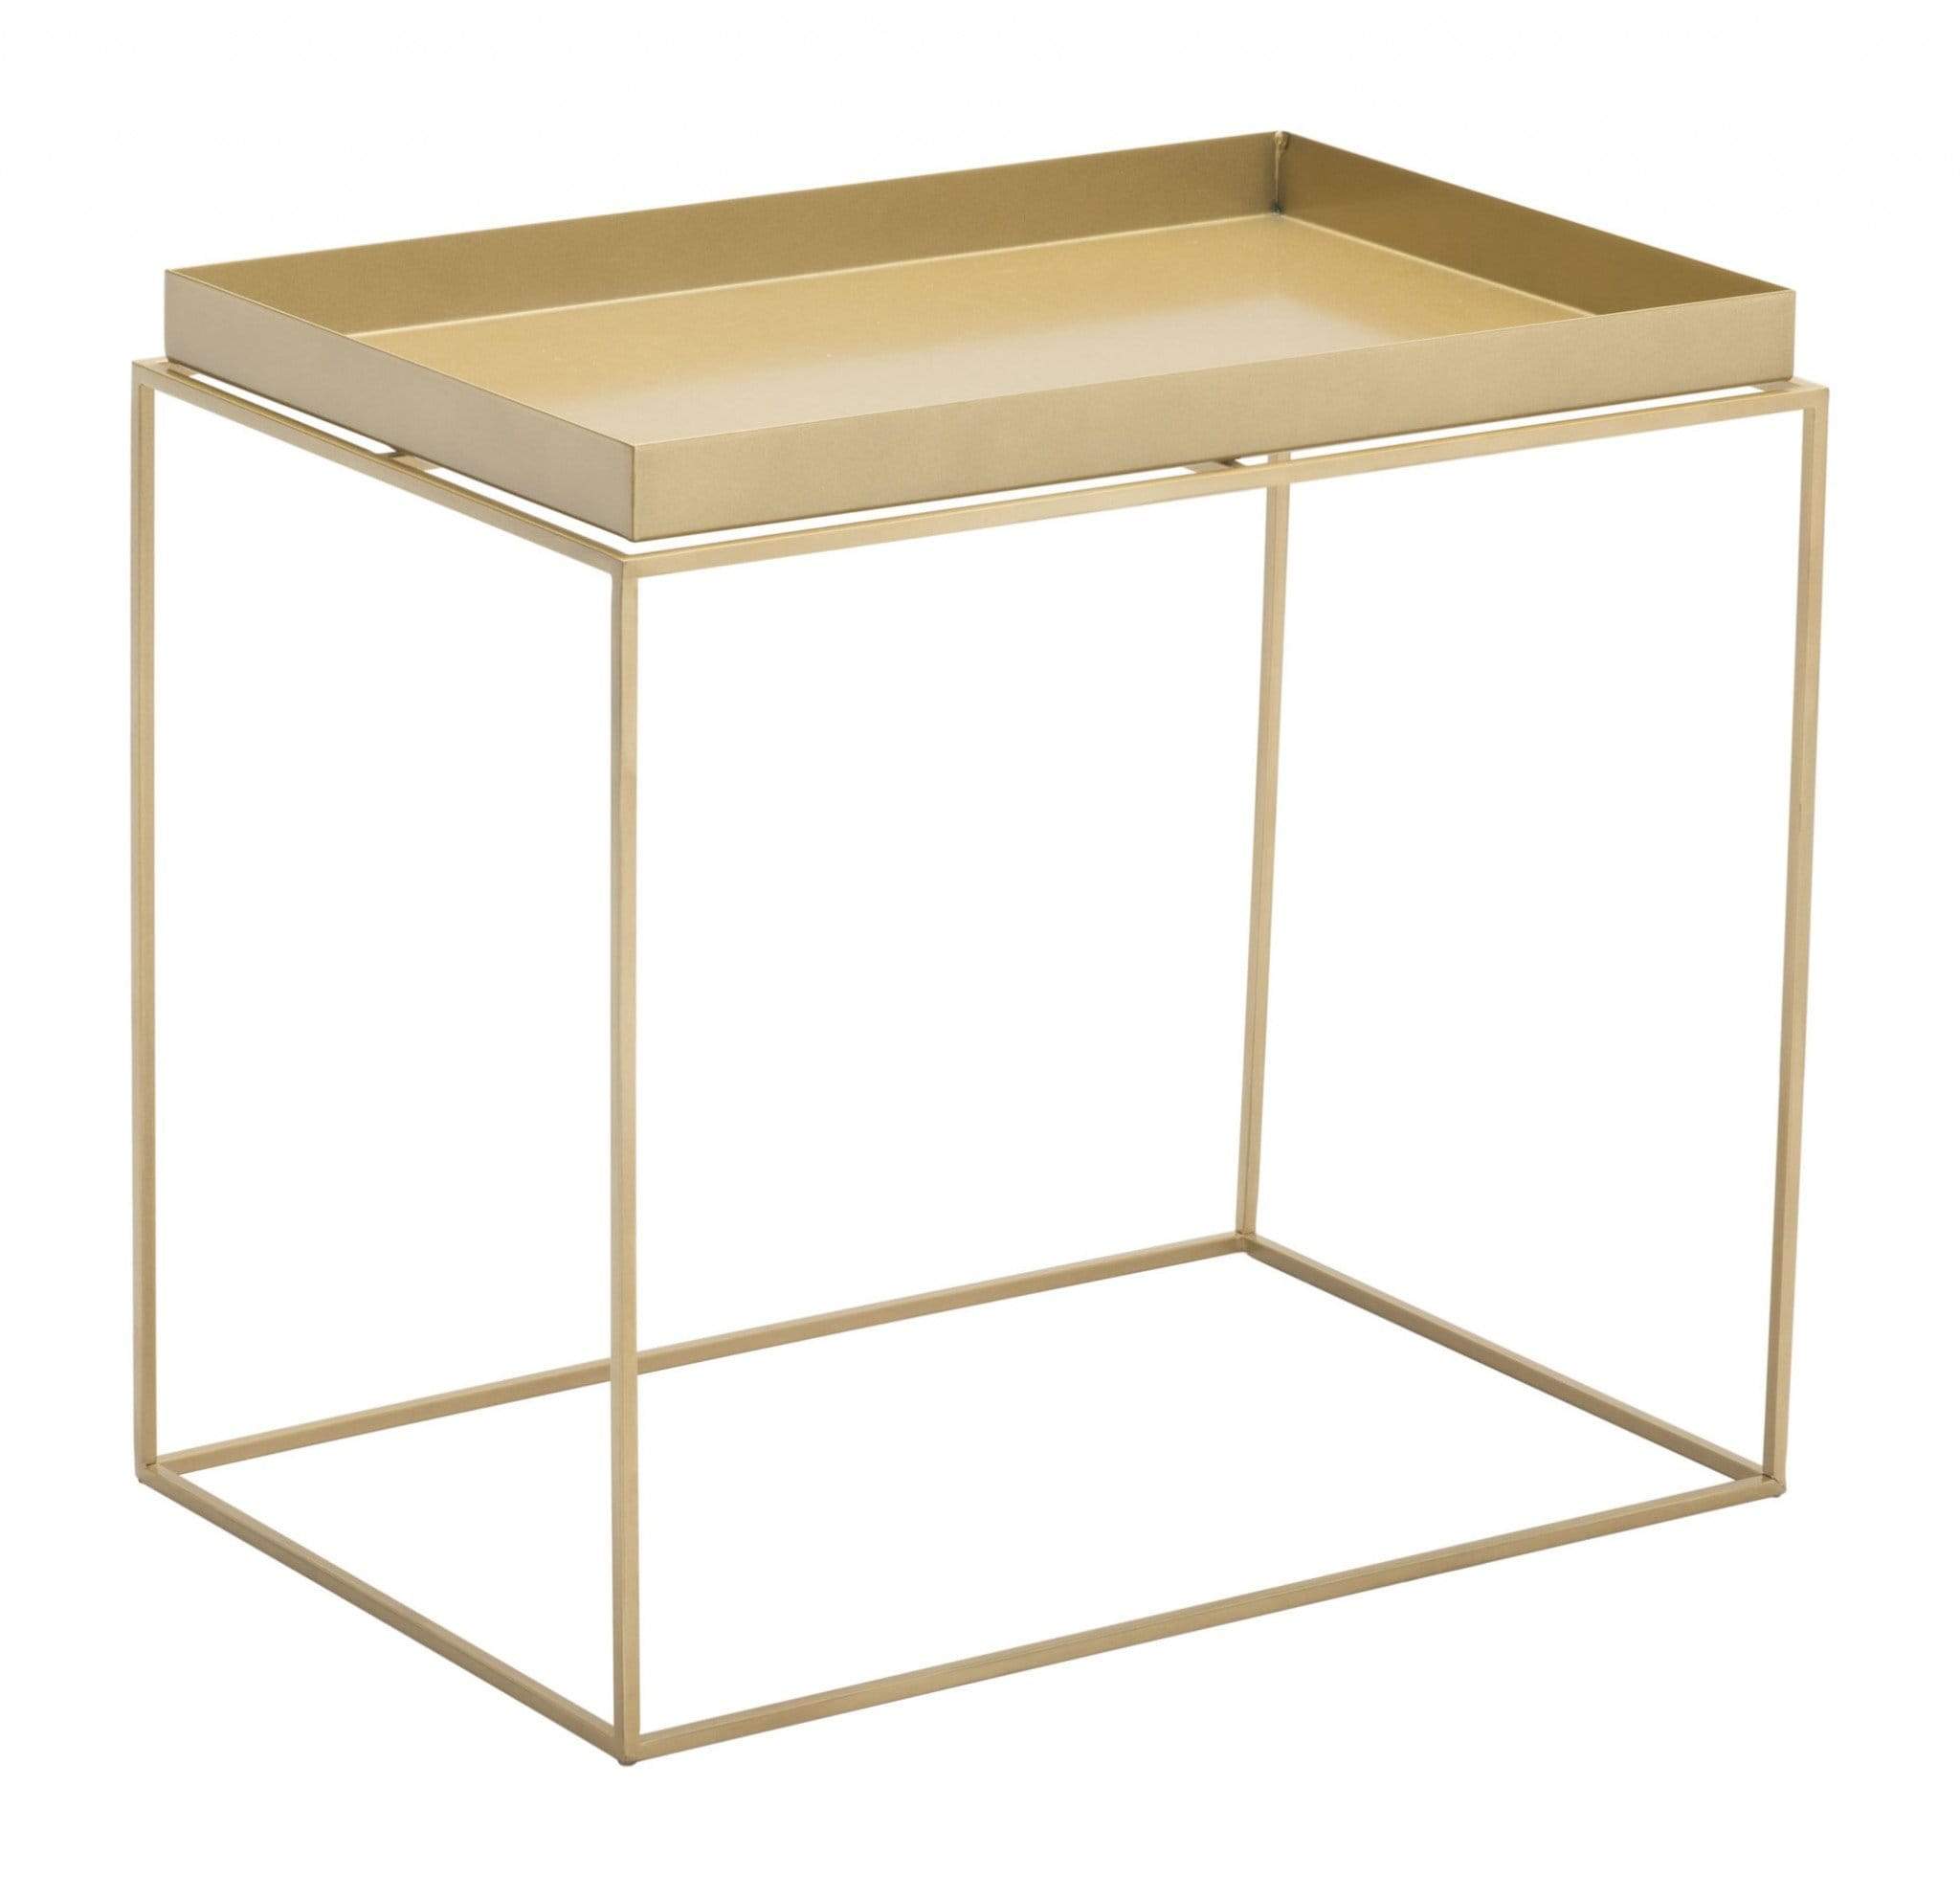 HomeRoots Outdoors Outdoor Furniture > Outdoor Tables Gold / Steel 23.6" x 23.6" x 15.7" Gold, Steel, Nesting Table